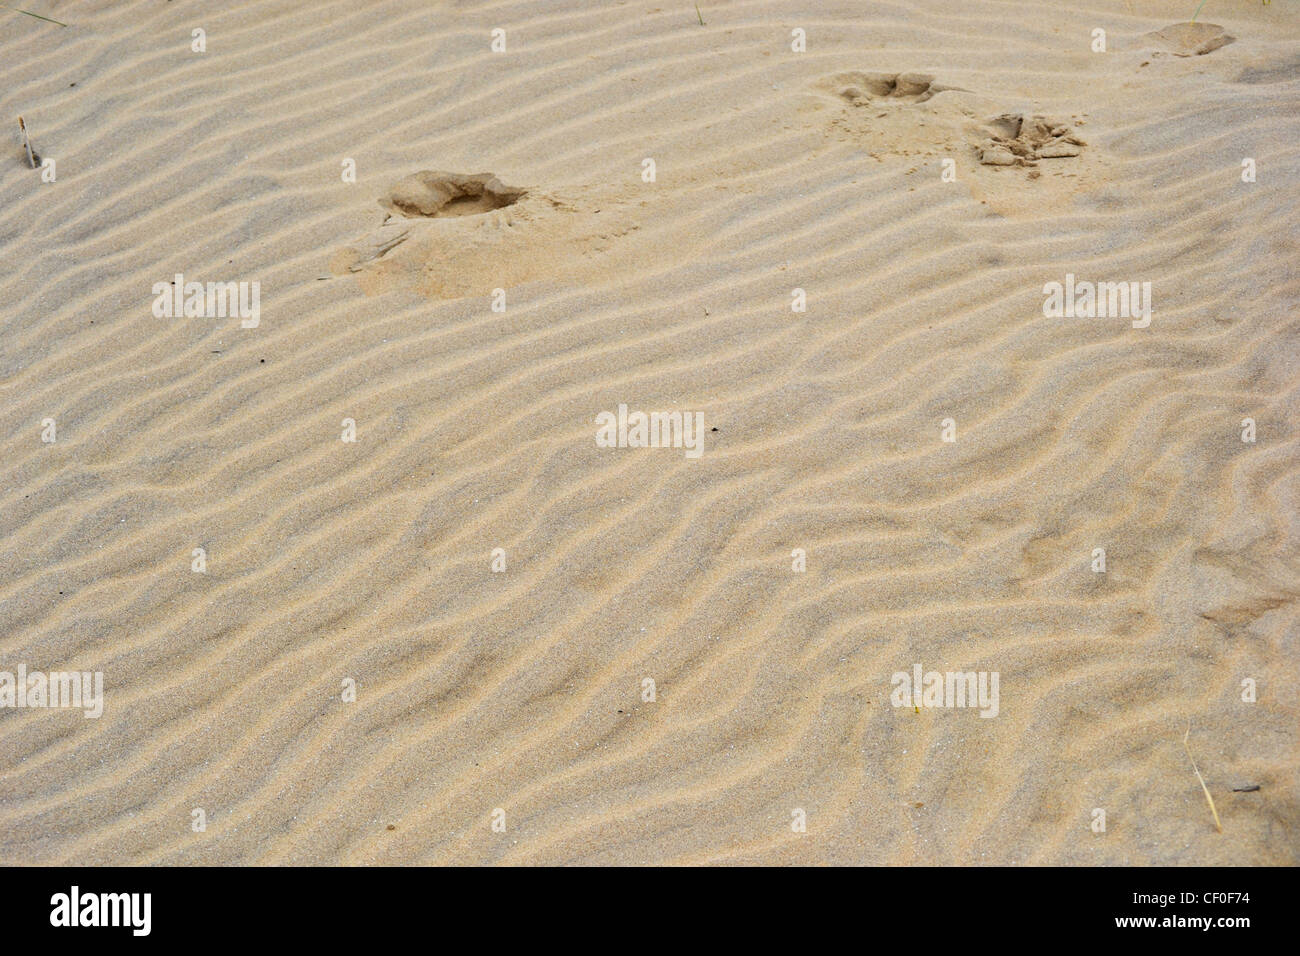 Abstract Patterns in the sand and beach grass on the Dunes of Camber Sands in East Sussex Stock Photo